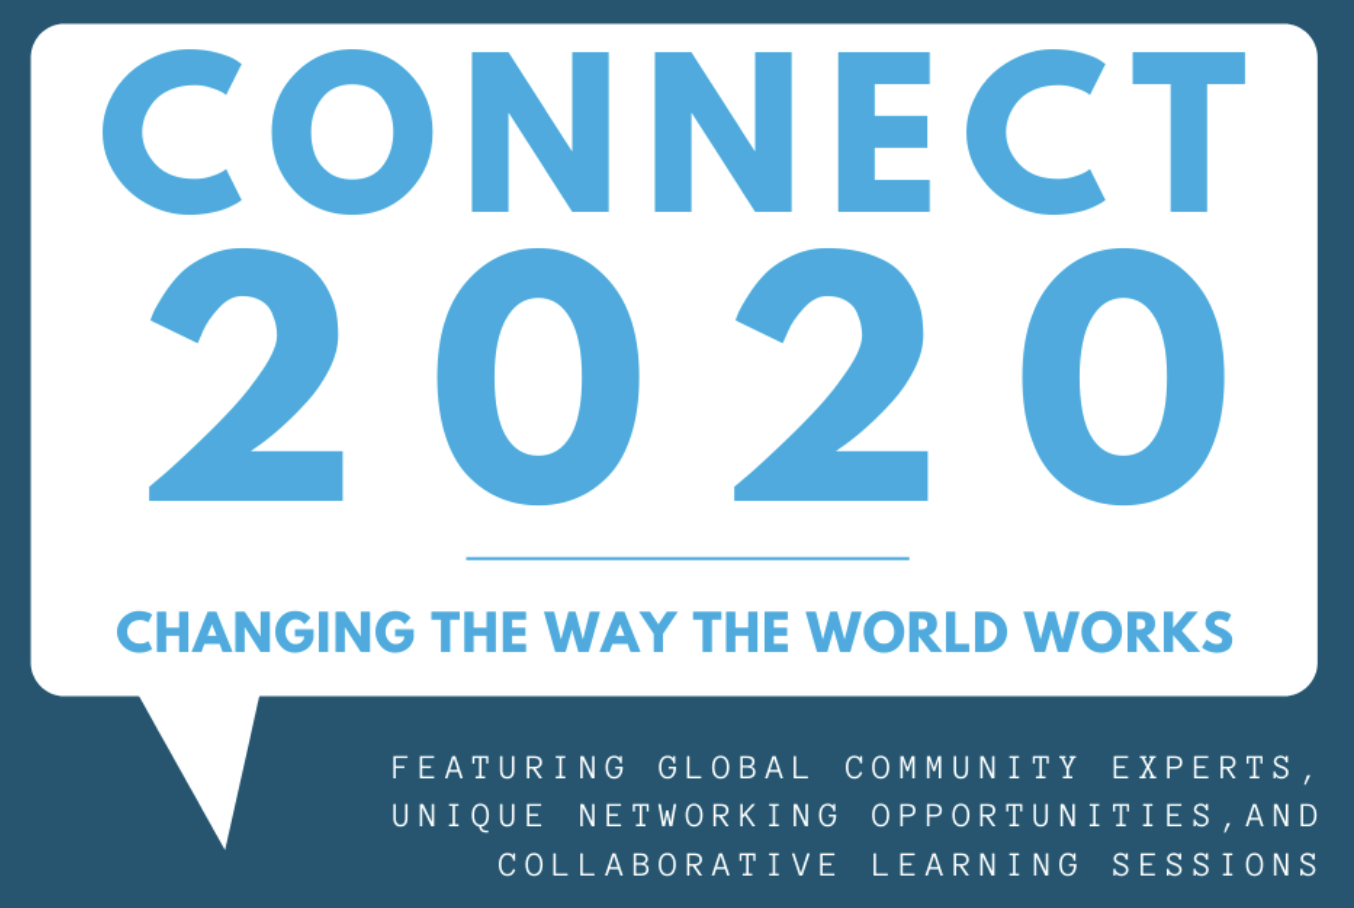 Connect 2020